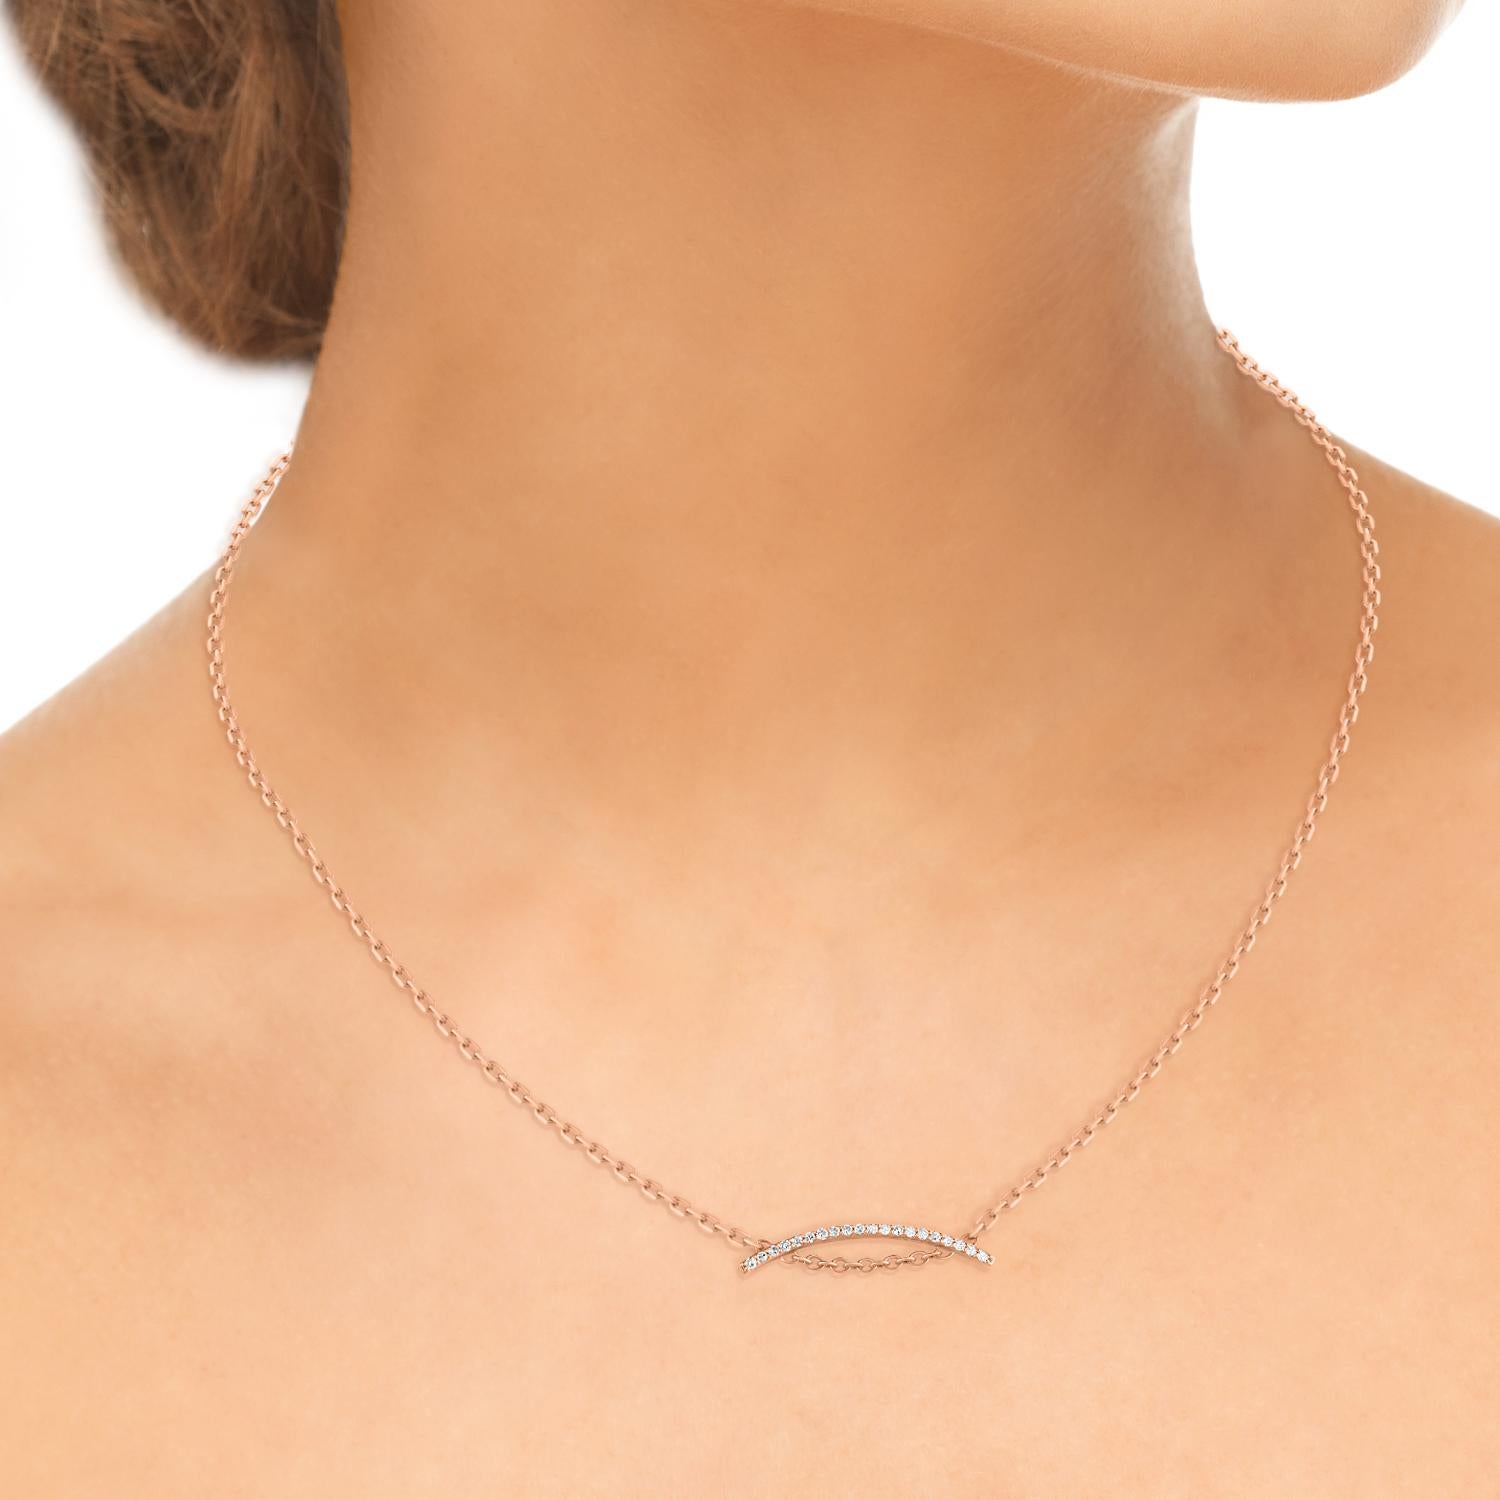 Modern TJD 0.20 Carat Diamond 18 Karat Rose Gold Curved Bar Necklace with 18 inch Chain For Sale